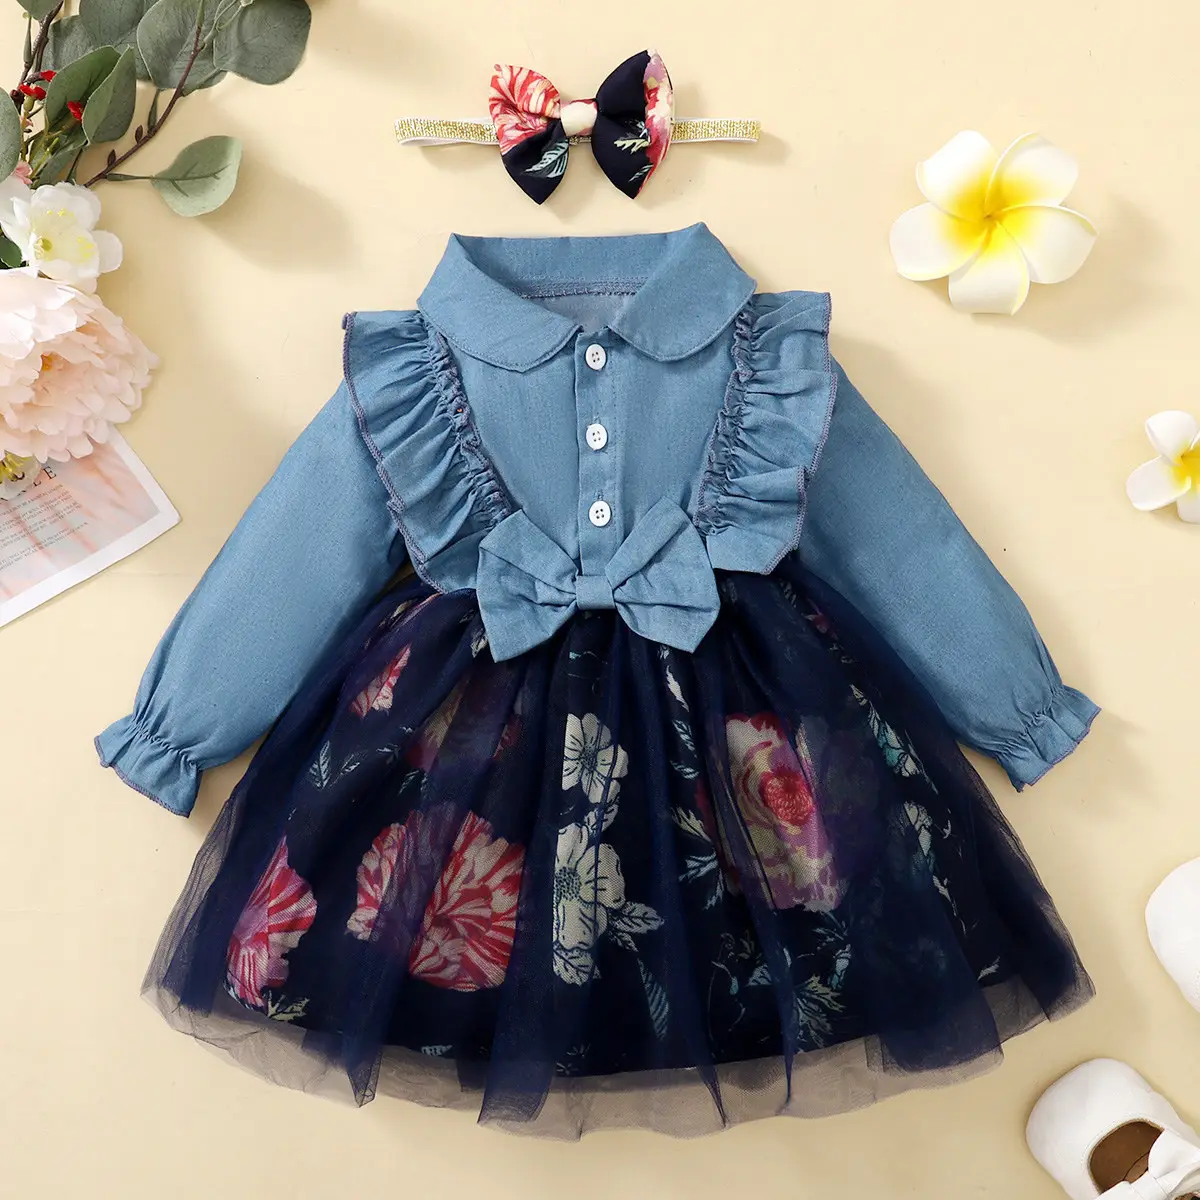 Sunny Baby Sunny Baby Children's Clothing Girls' Dress Autumn 0-3 years Old Floral Dress